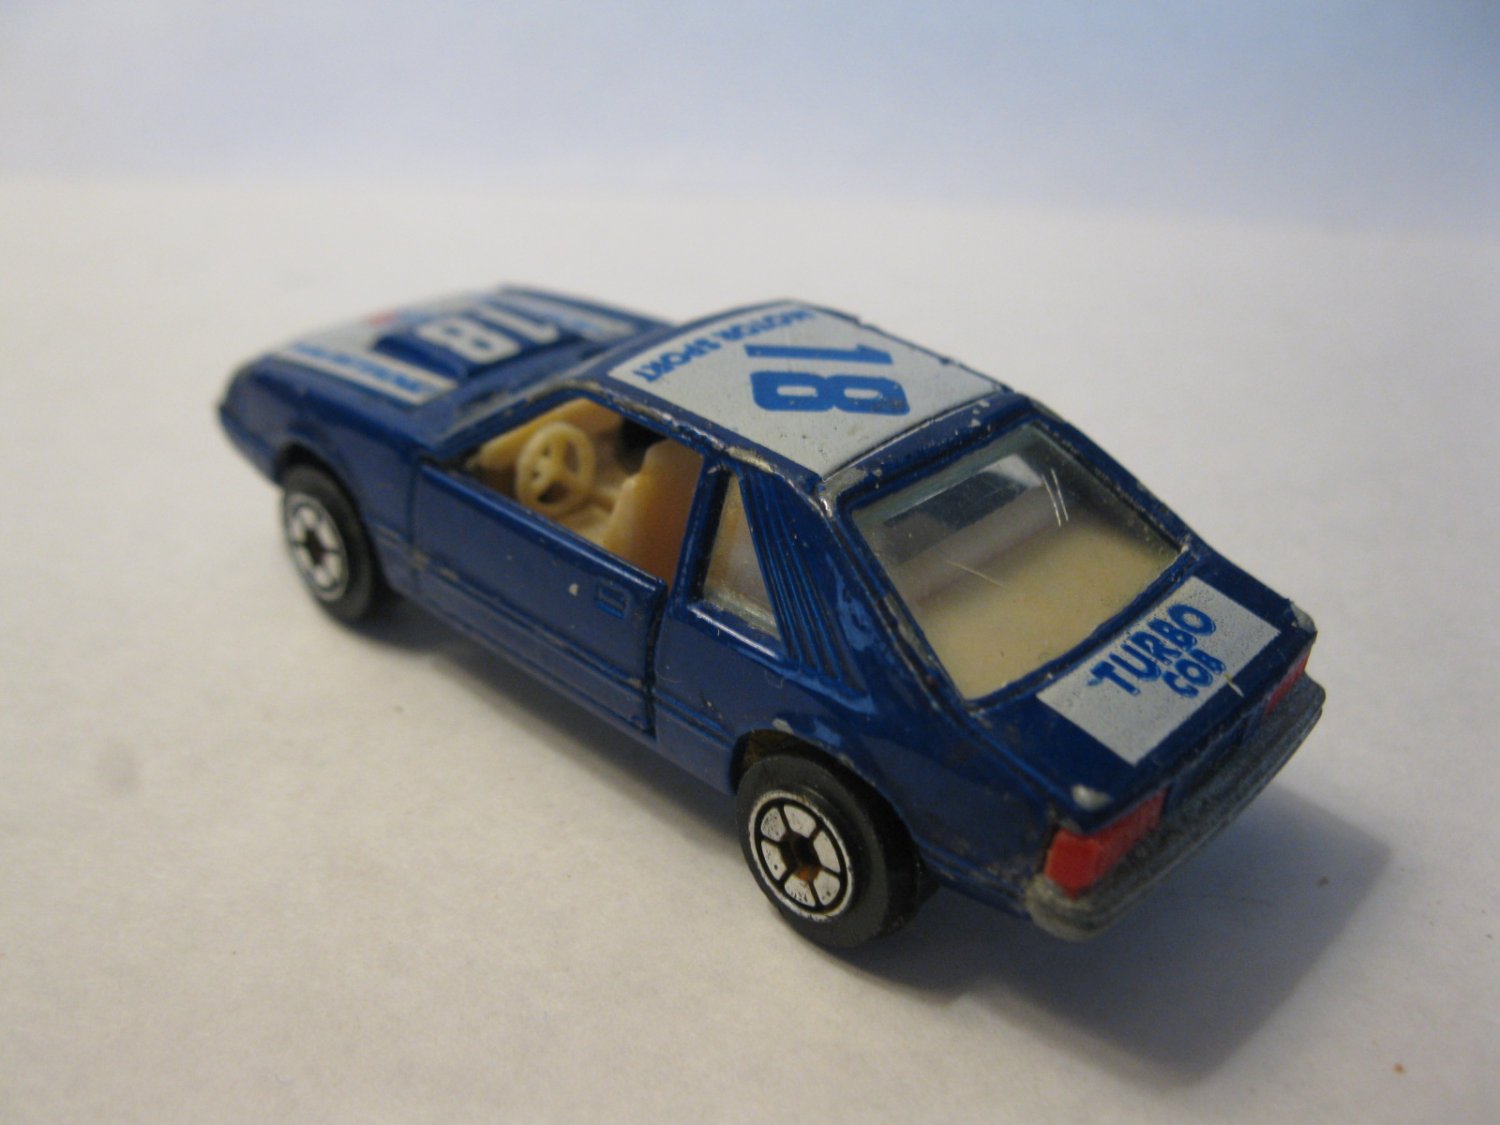 Yatming Diecast car #1067: Ford Mustang Turbo Cob #18- doors open